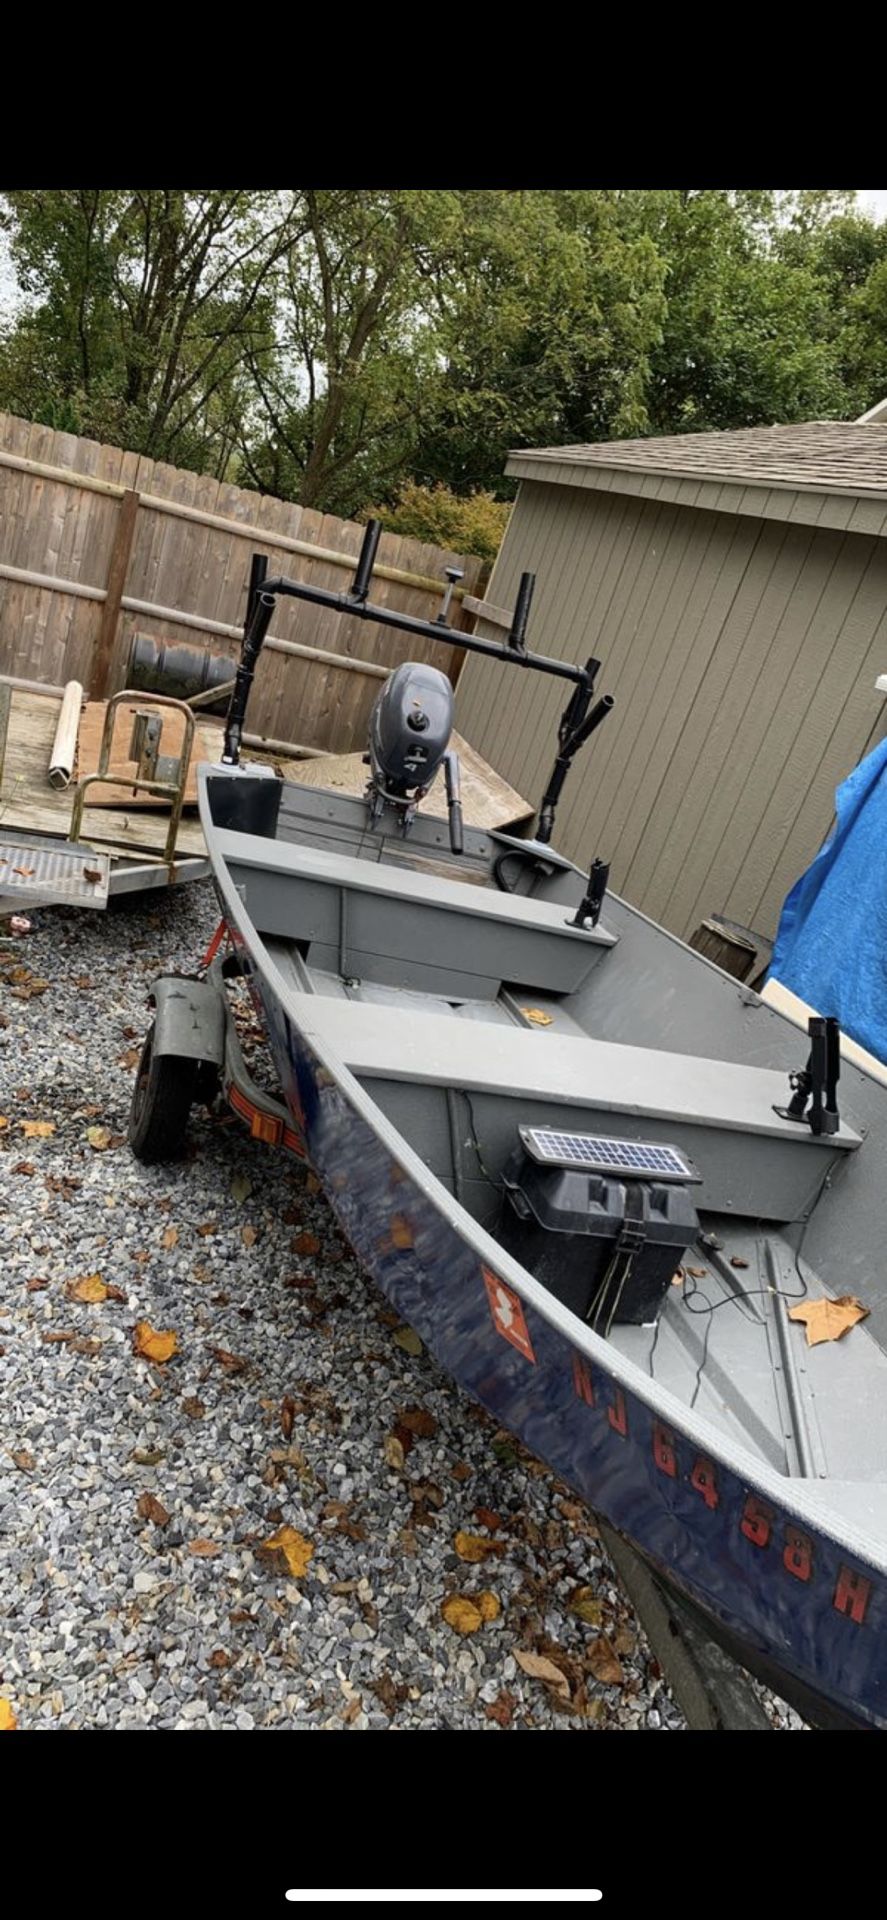 Monarch open aluminum boat with Motor and trailer